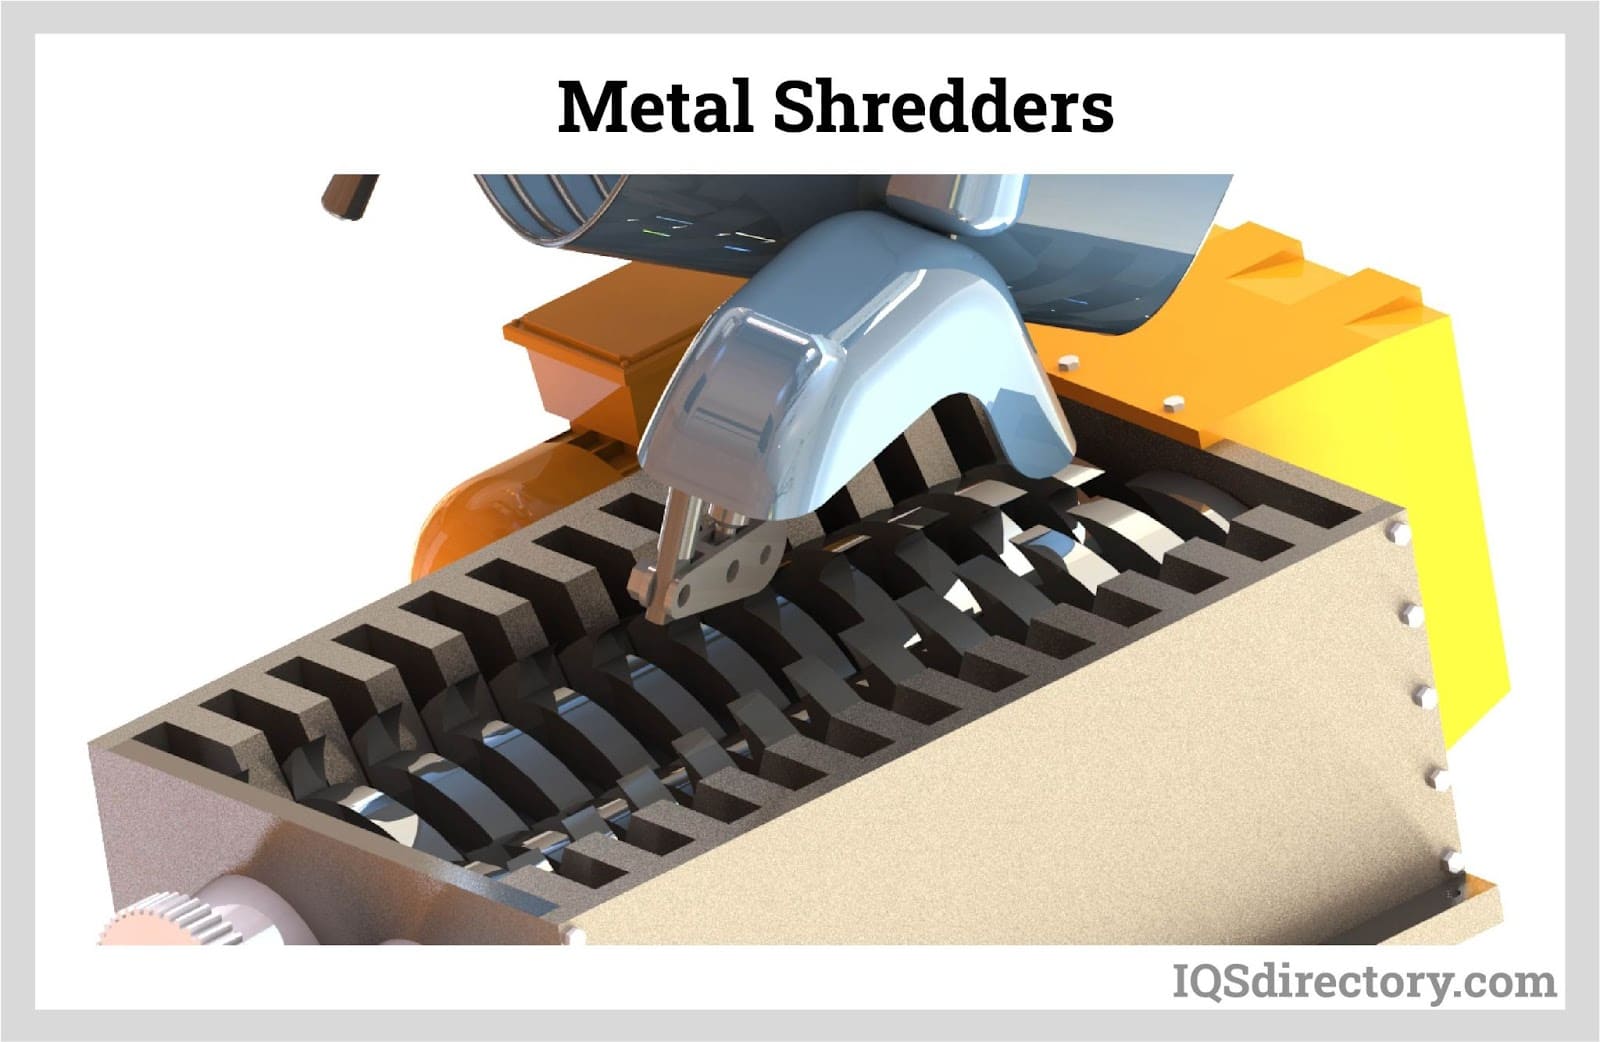 All About Plastic Shredders: From Applications to Advantages - ACC